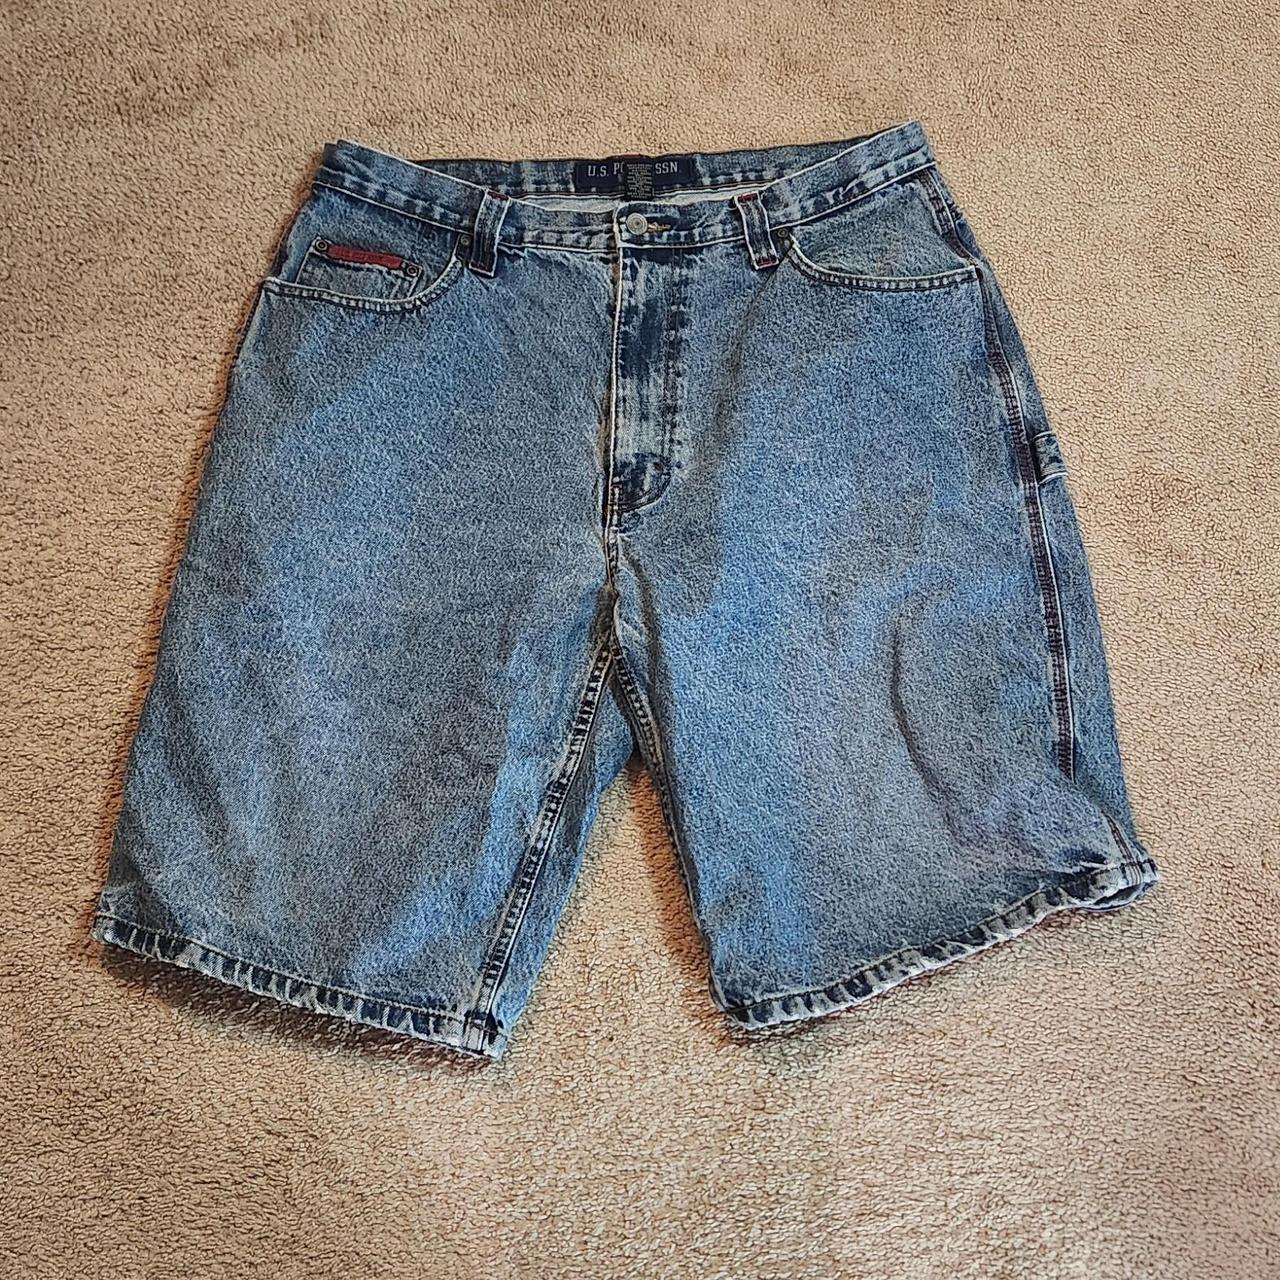 Us polo jorts canvas. Size 36 waist. All flaws in... - Depop